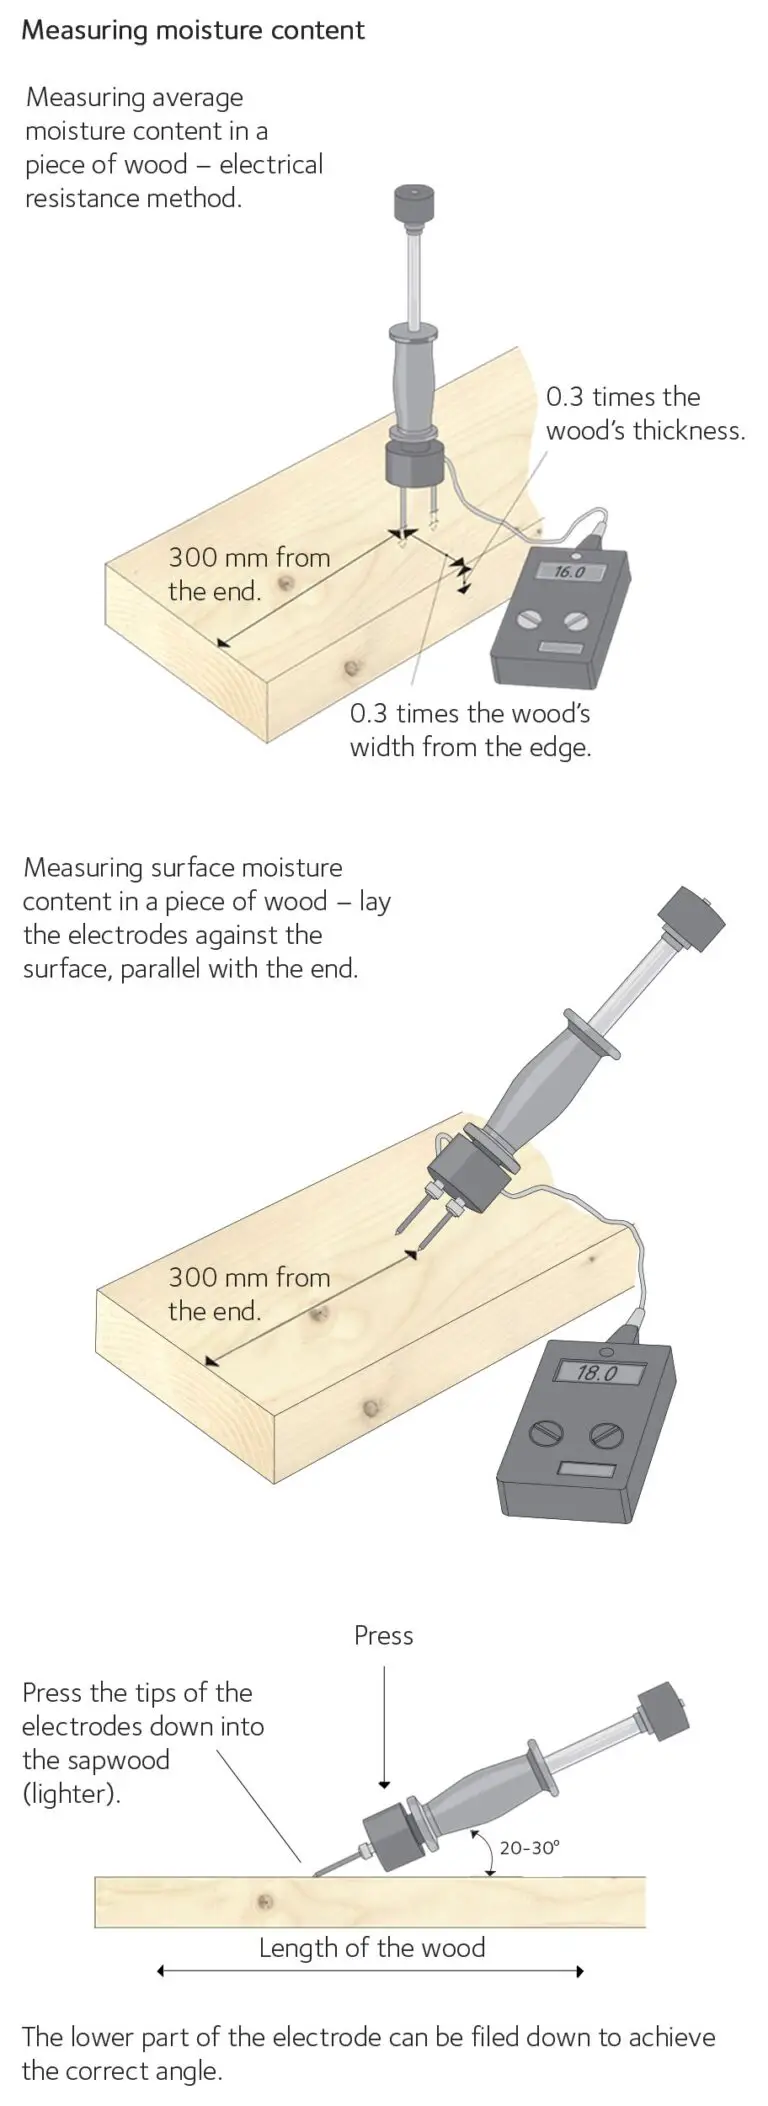 How to Determine Moisture Content of Wood